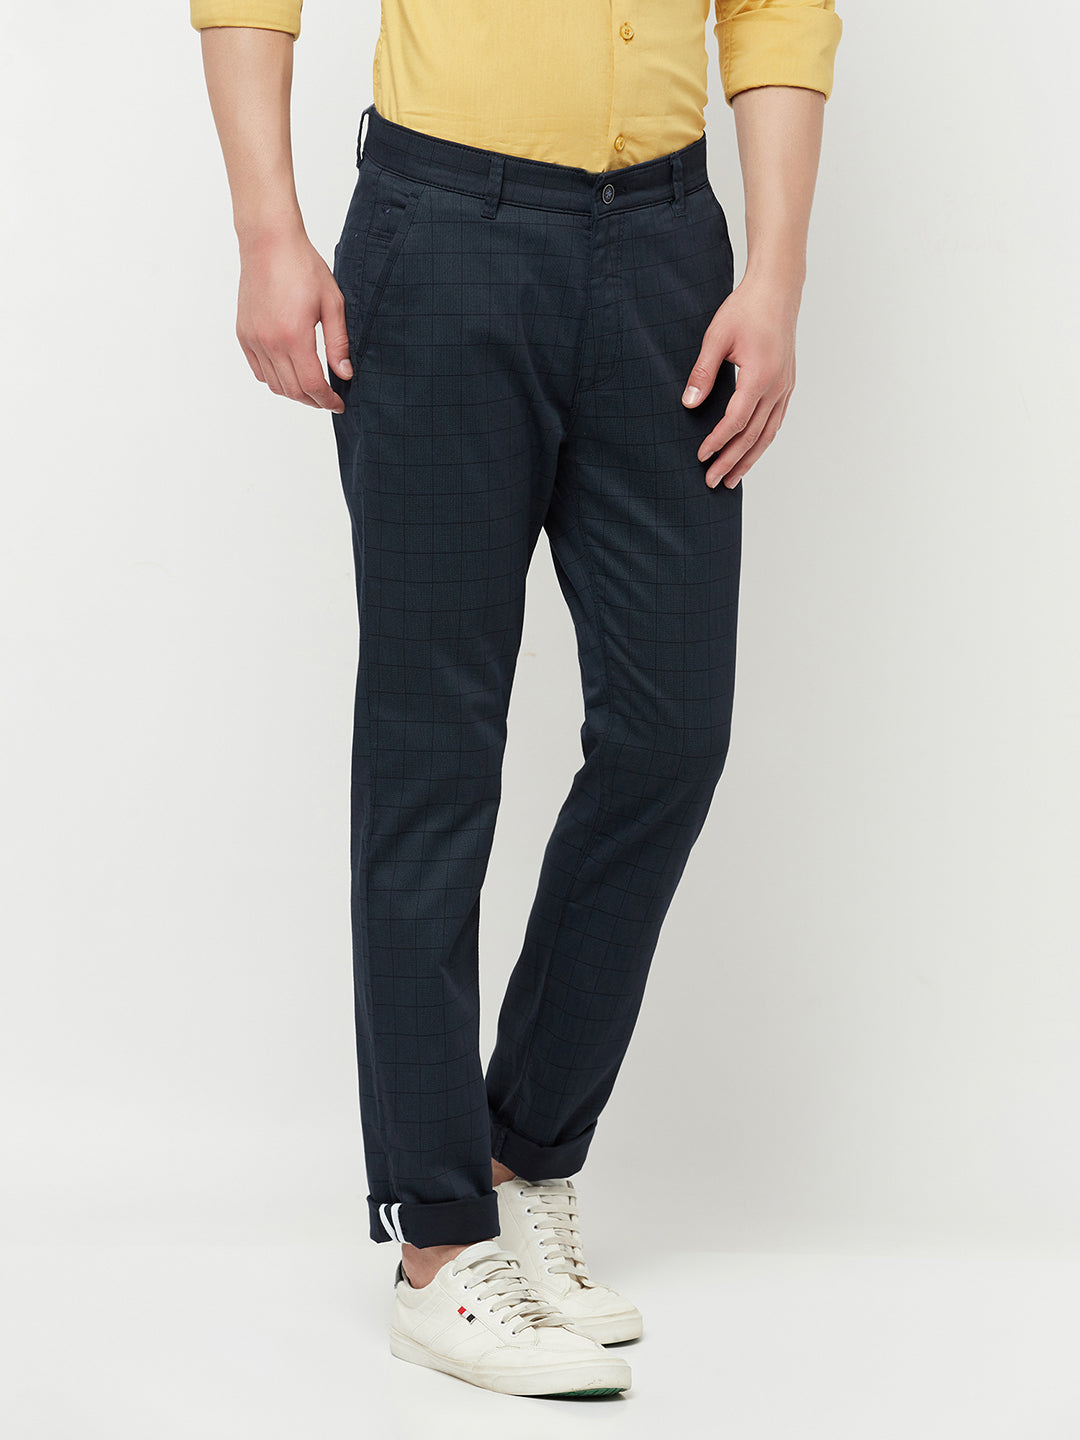 Navy Blue Checked Trouser - Men Trousers